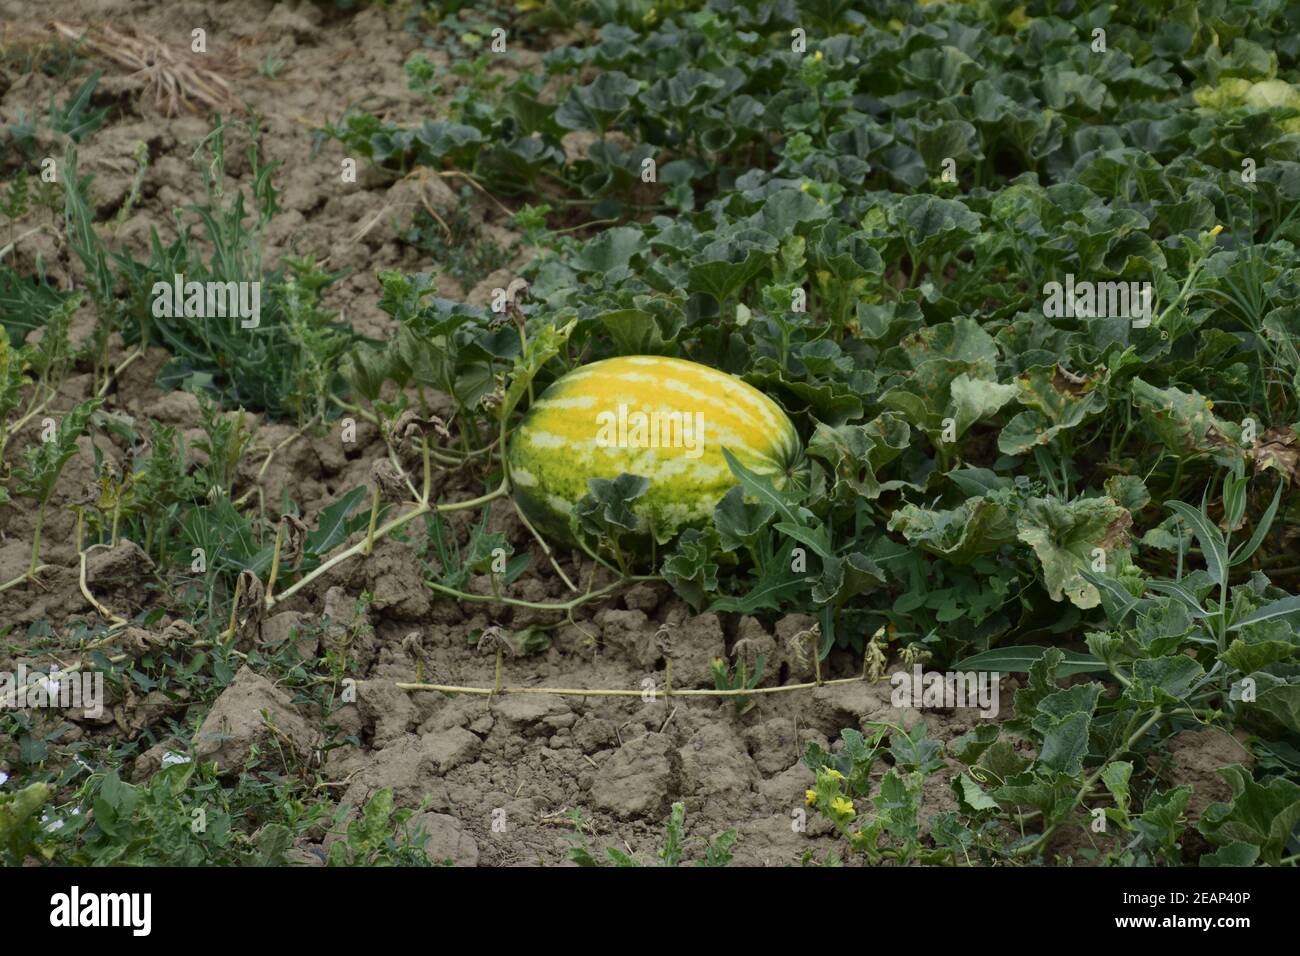 The growing water-melon in the field Stock Photo